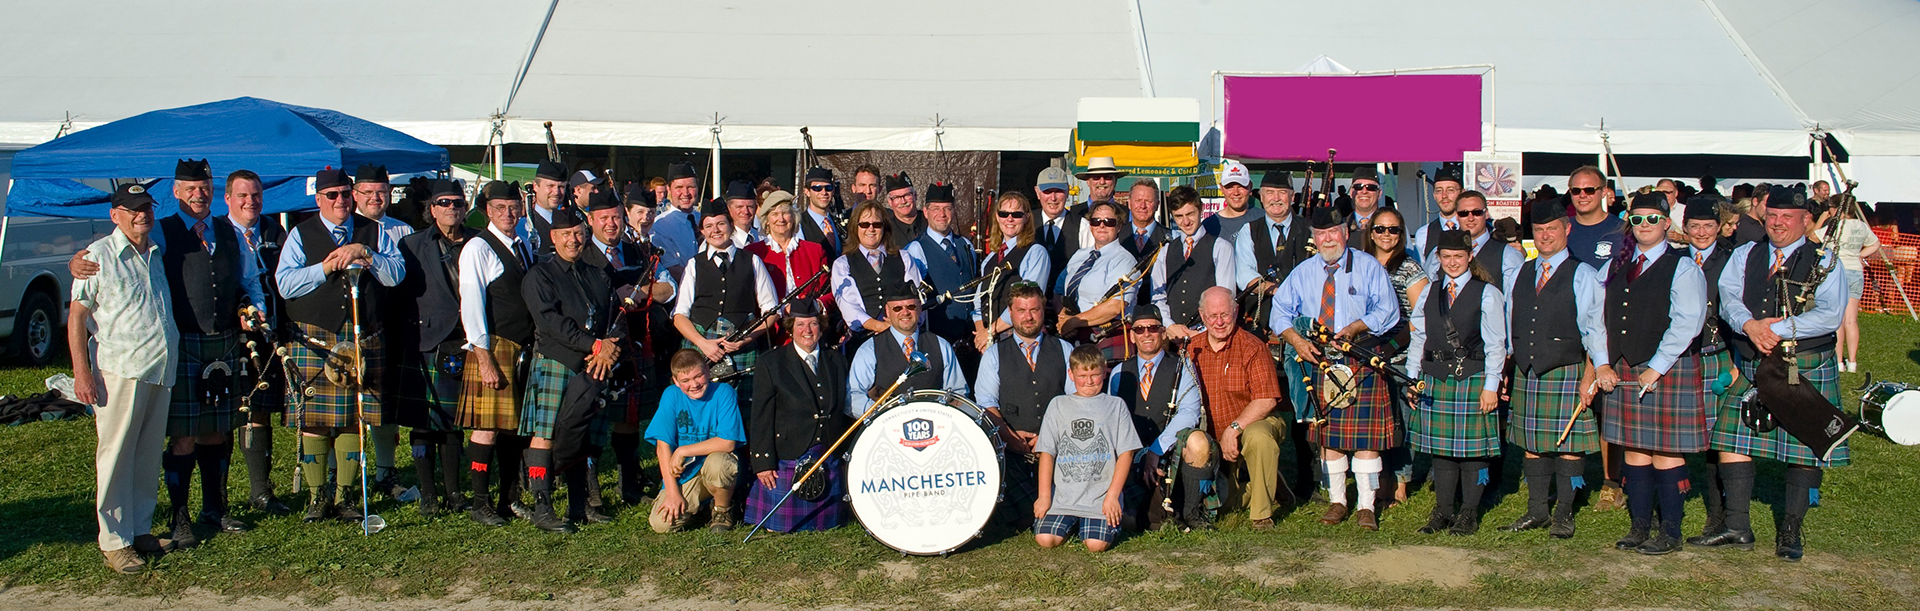 Manchester Pipe Band Community Connecticut